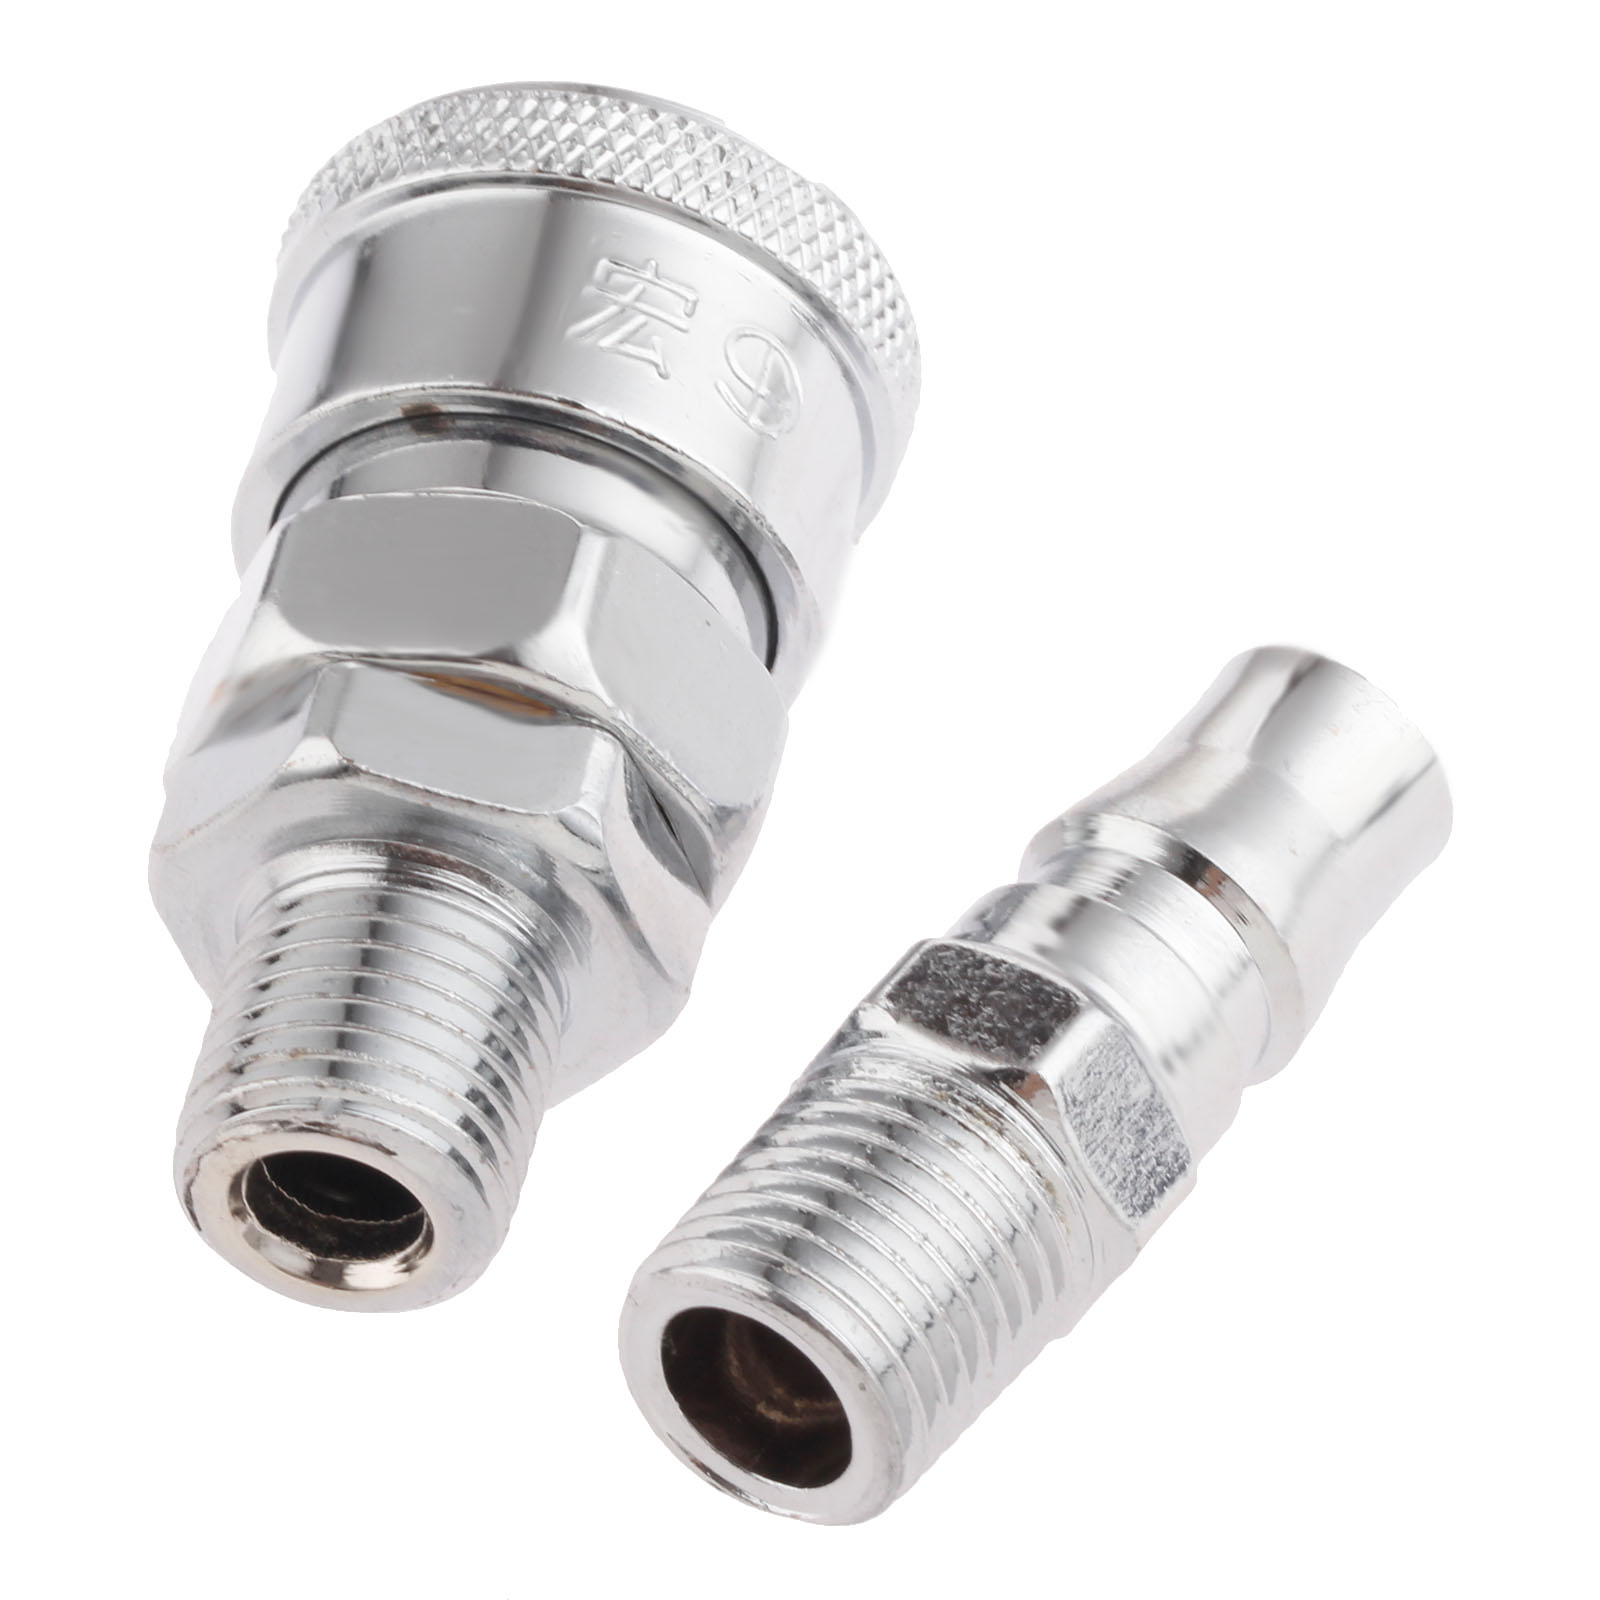 2 Male Quick Release Compressed Air Line Coupler Connector Fitting 1/4″ BSP